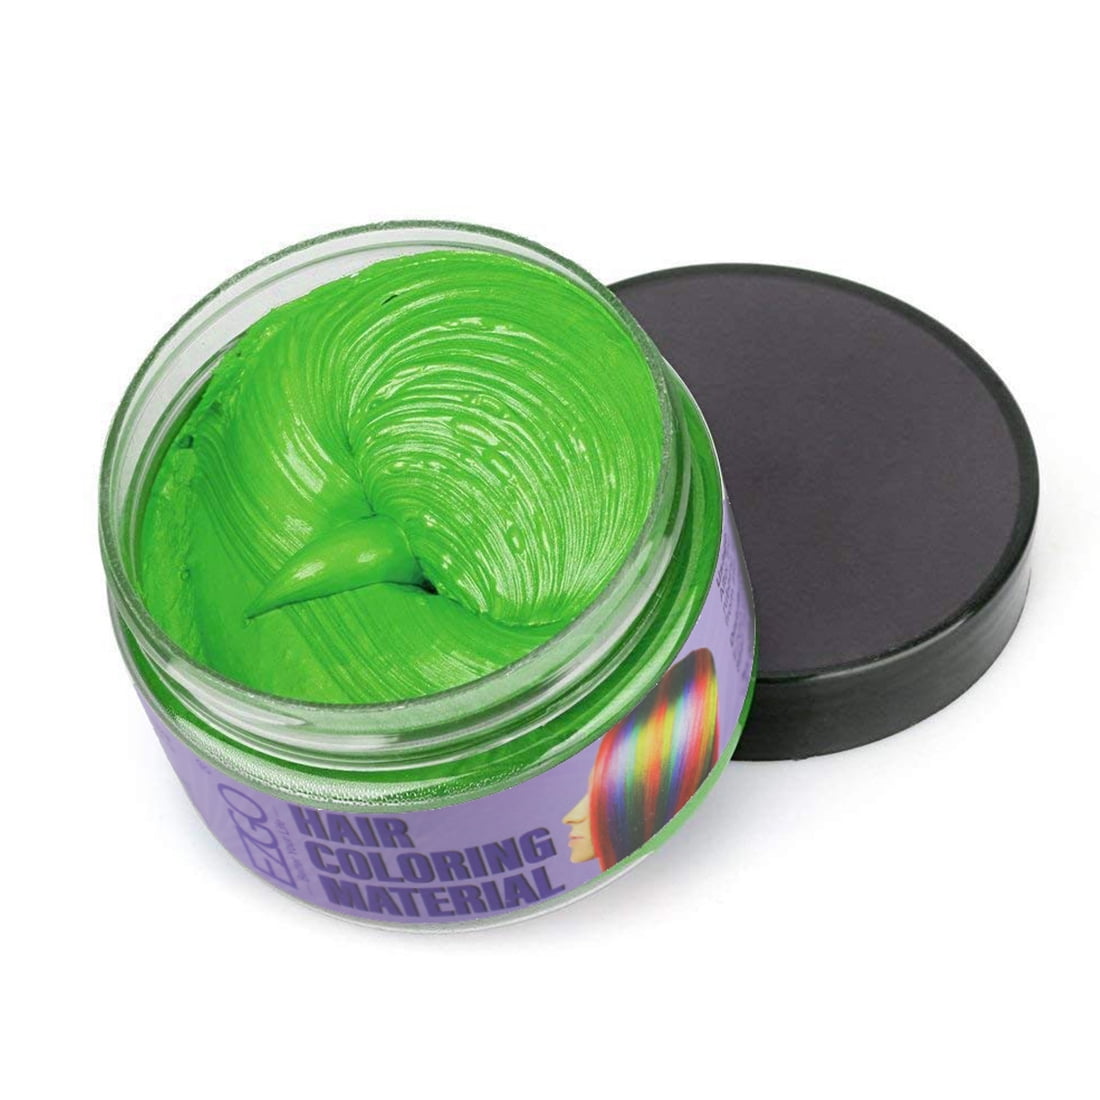 Hair Wax Temporary Hair Coloring Styling Cream Mud Dye - Green for  Halloween Day 